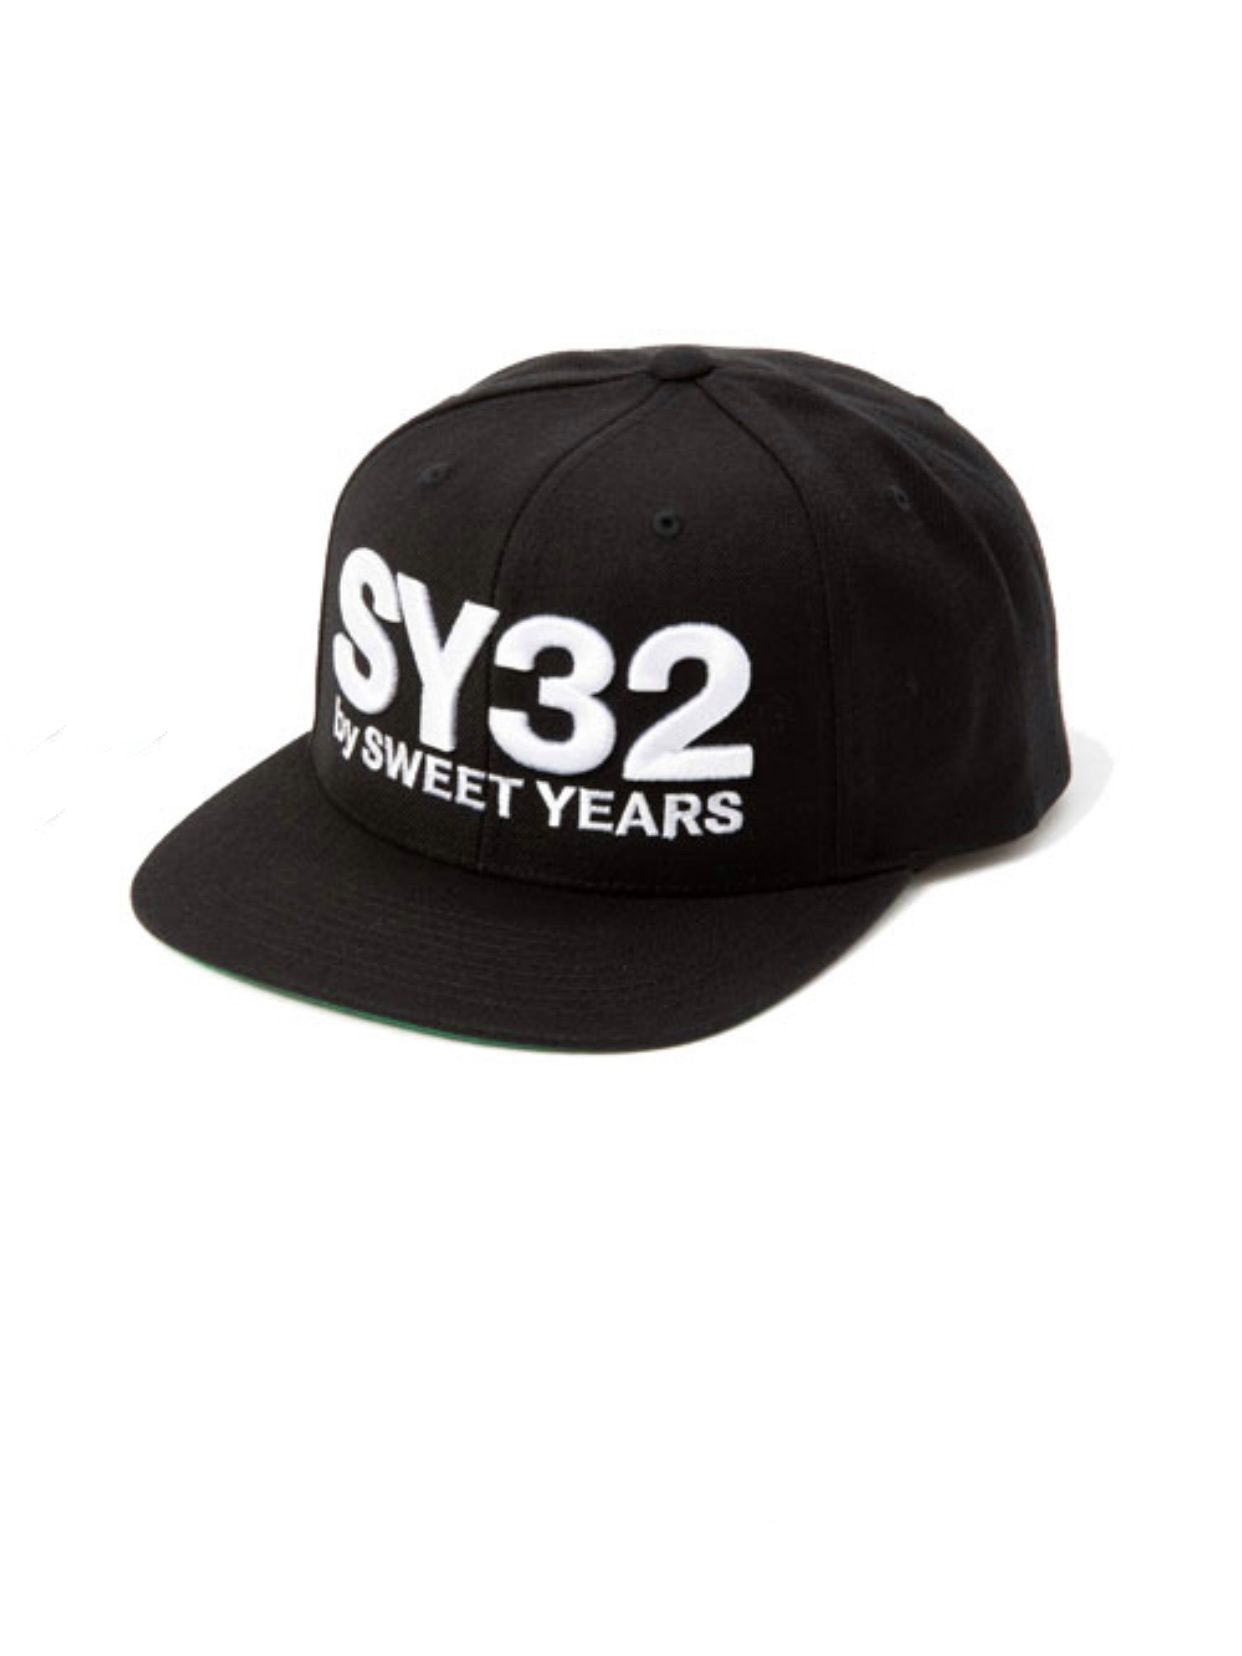 SY32 by SWEET YEARS - 【23AW】3D ロゴ スナップバック キャップ / 3D